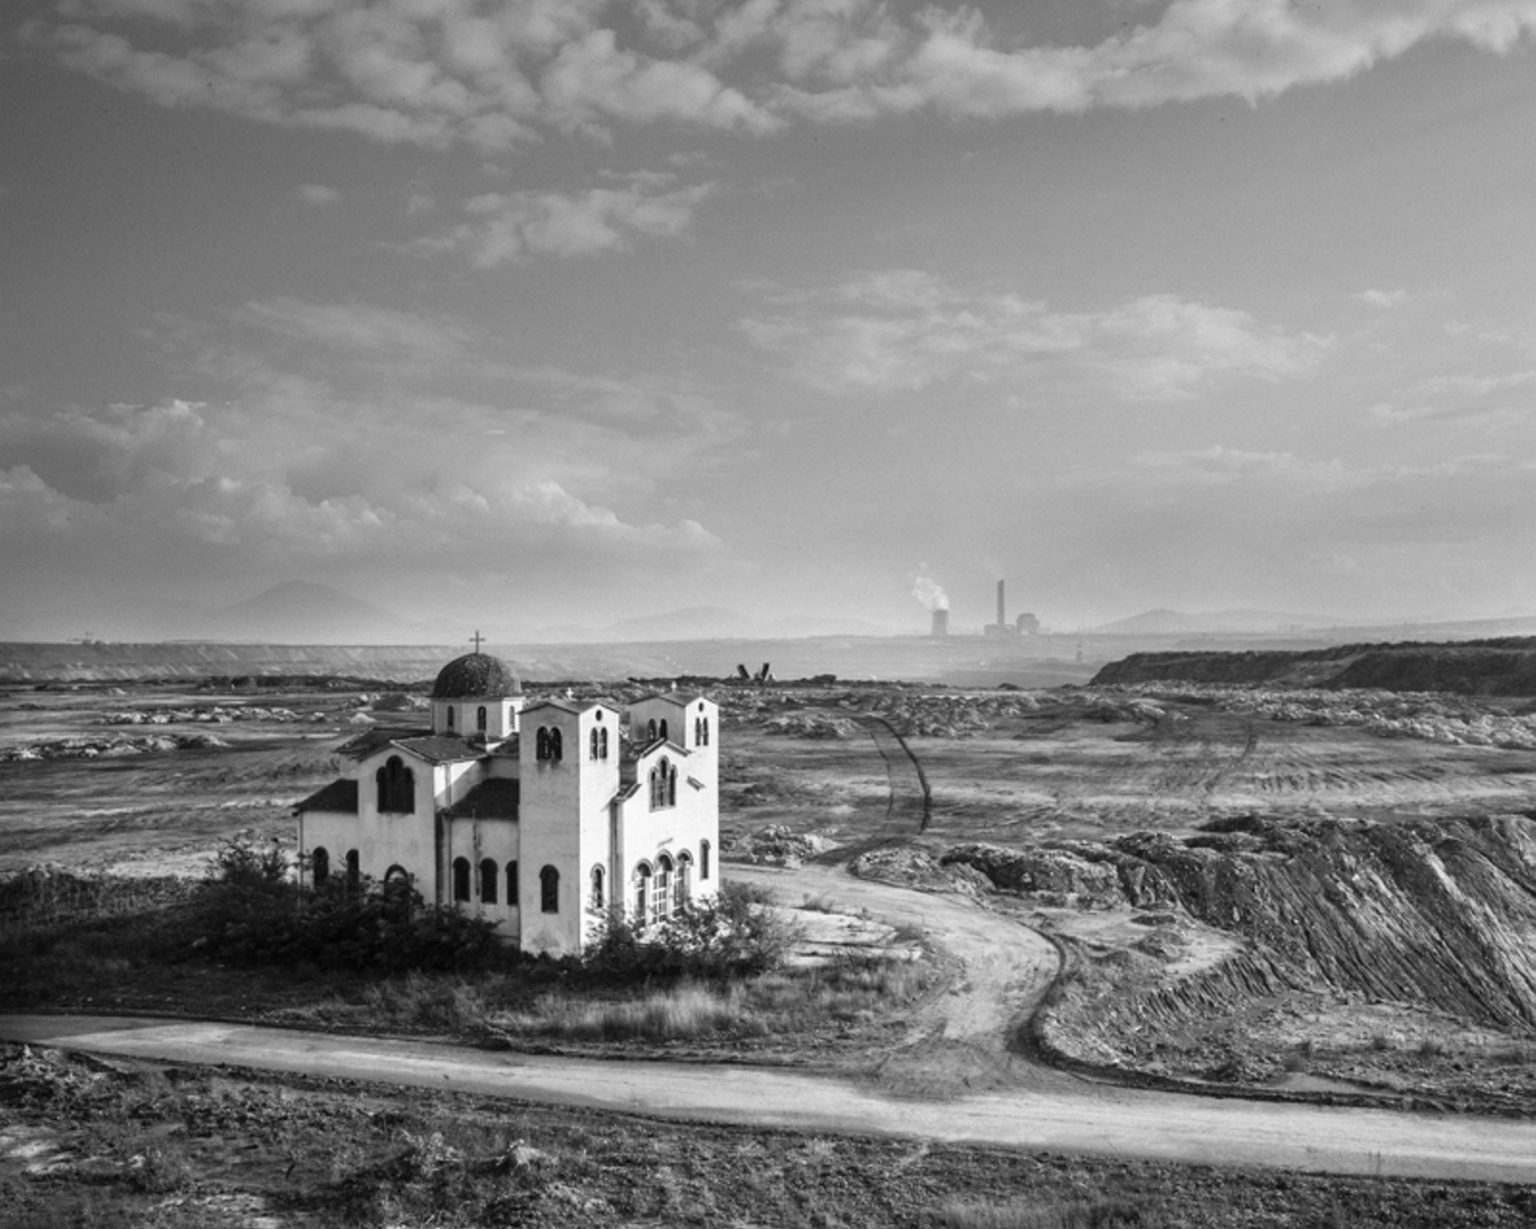 A church is what remains of the village of Komanos, destroyed by the expanding coal mine of Ptolemaida. Greece, 2014